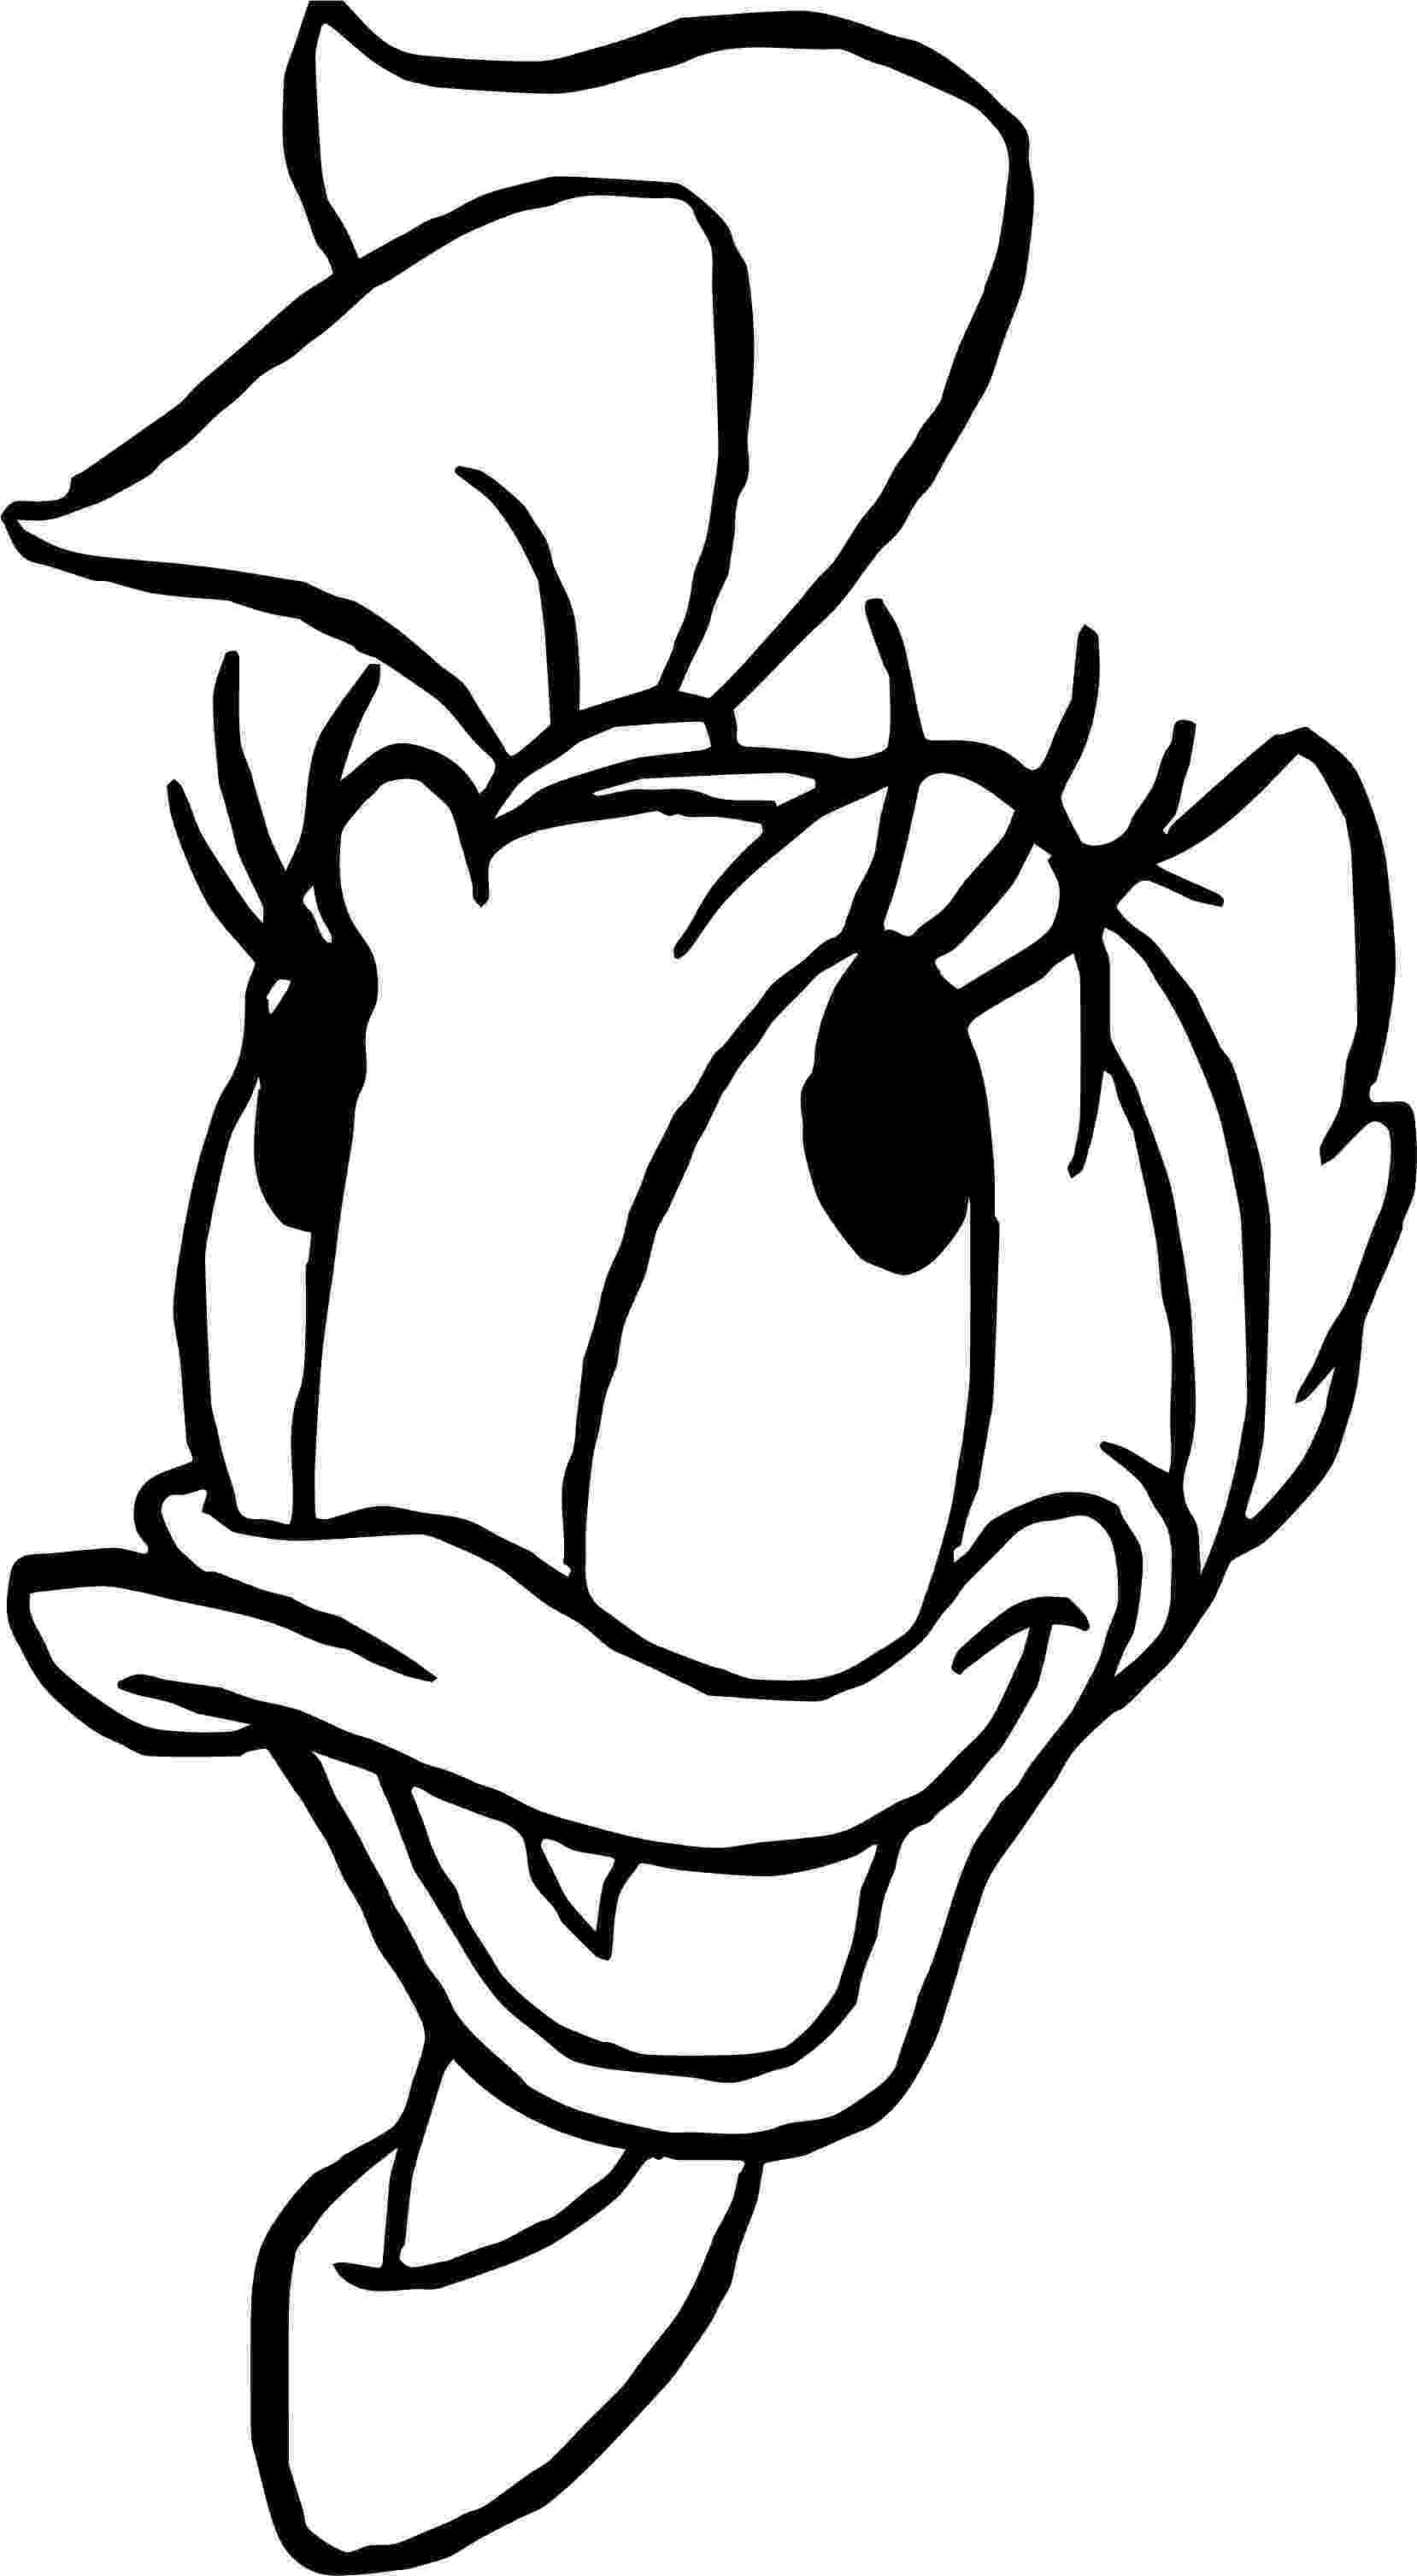 daisy duck template daisy duck face pages coloring pages duck daisy template 